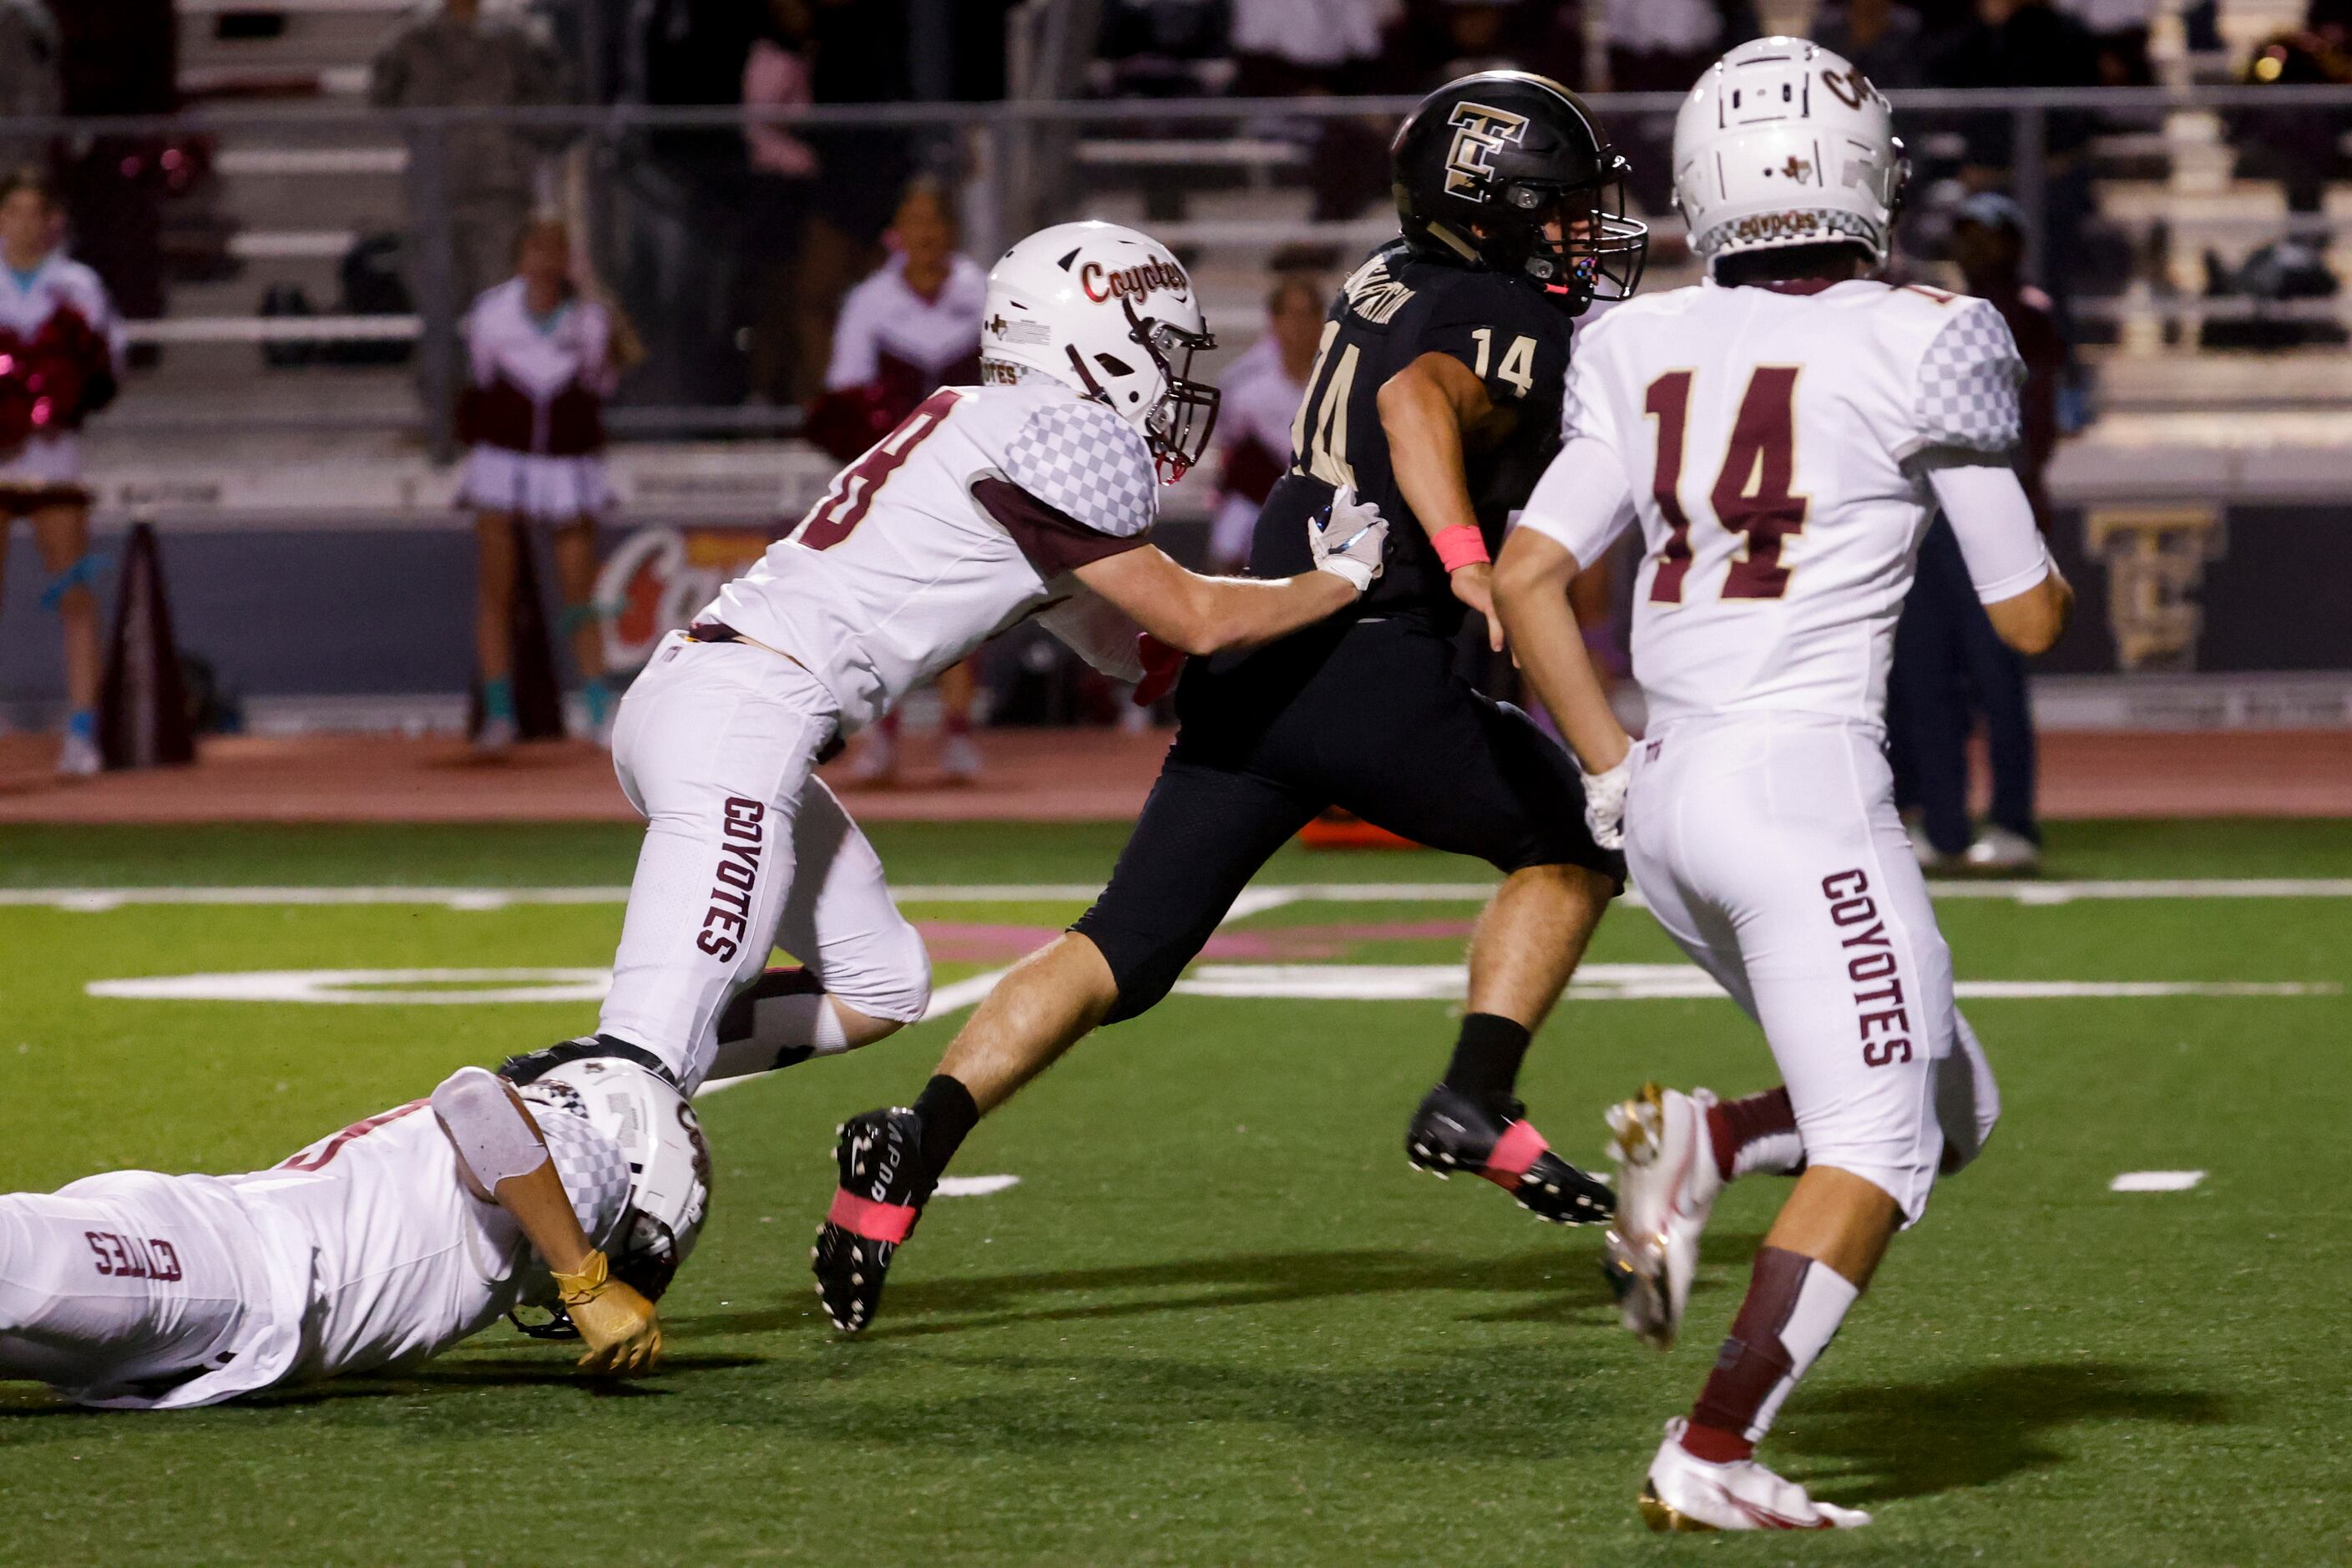 The Colony’s running back Caden Chaulk (14) evades the Frisco Heritage defense for a long...